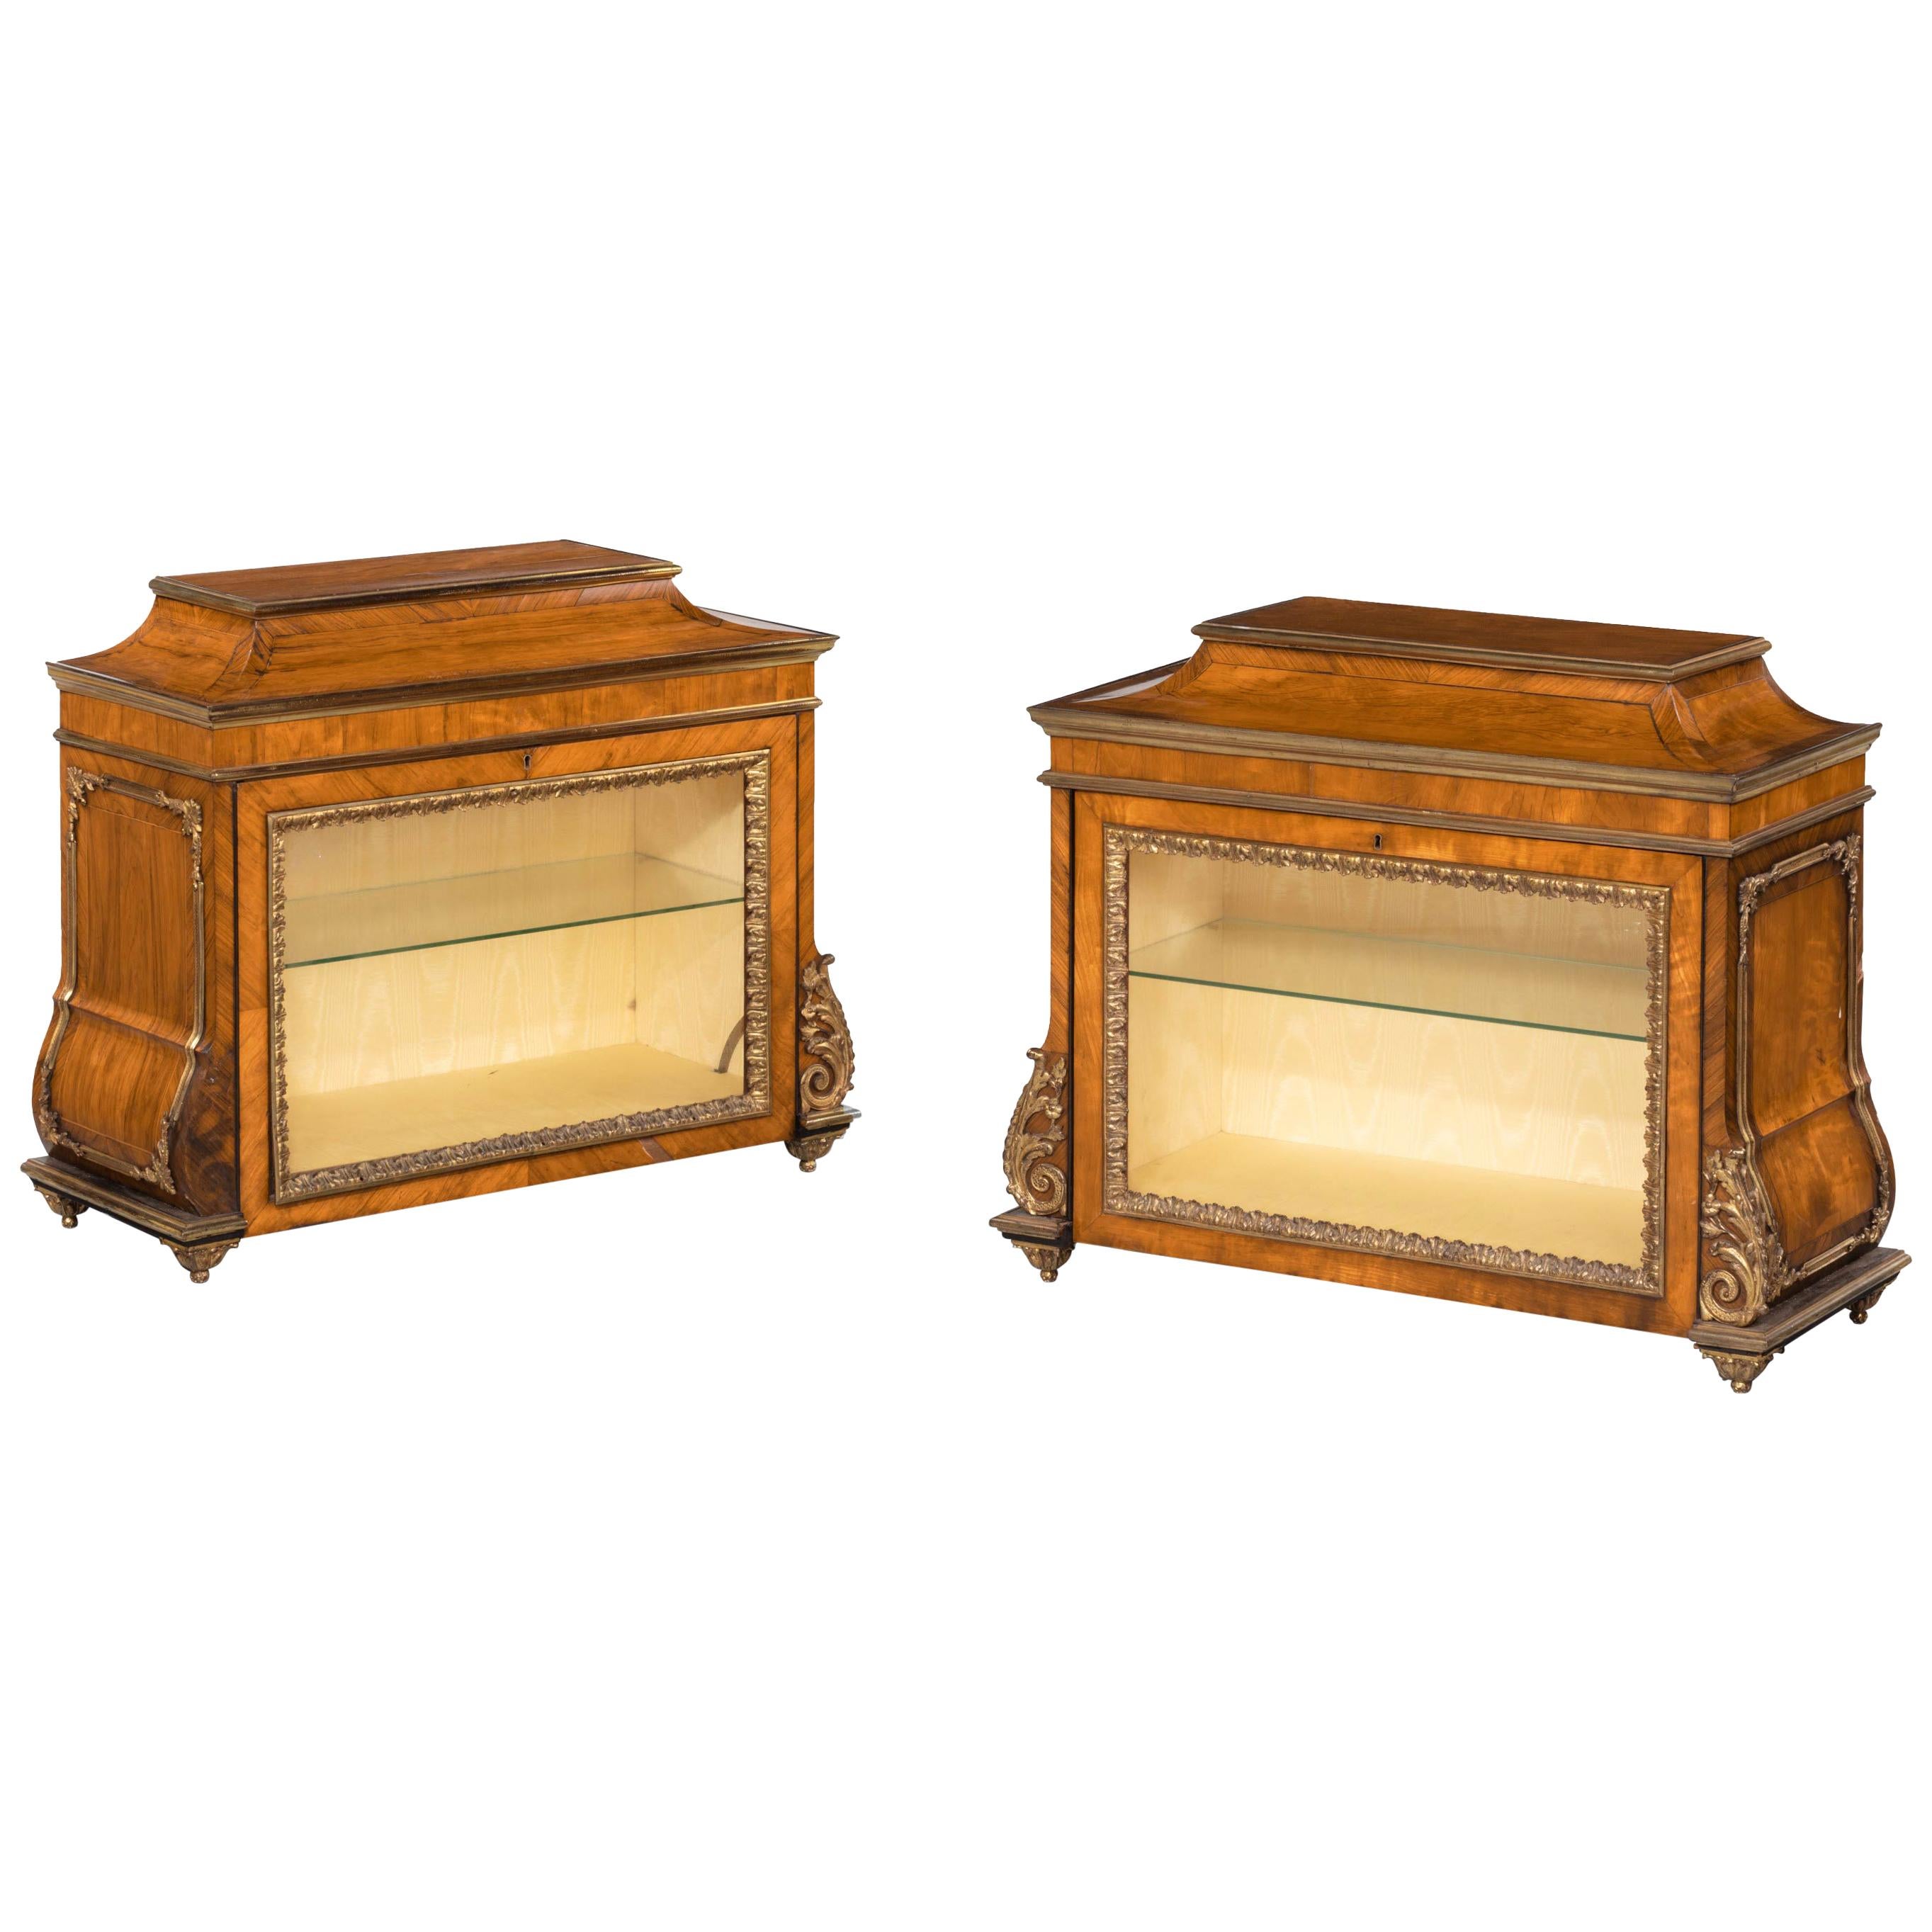 Rare Pair of George III Period Kingwood Table Cabinets For Sale